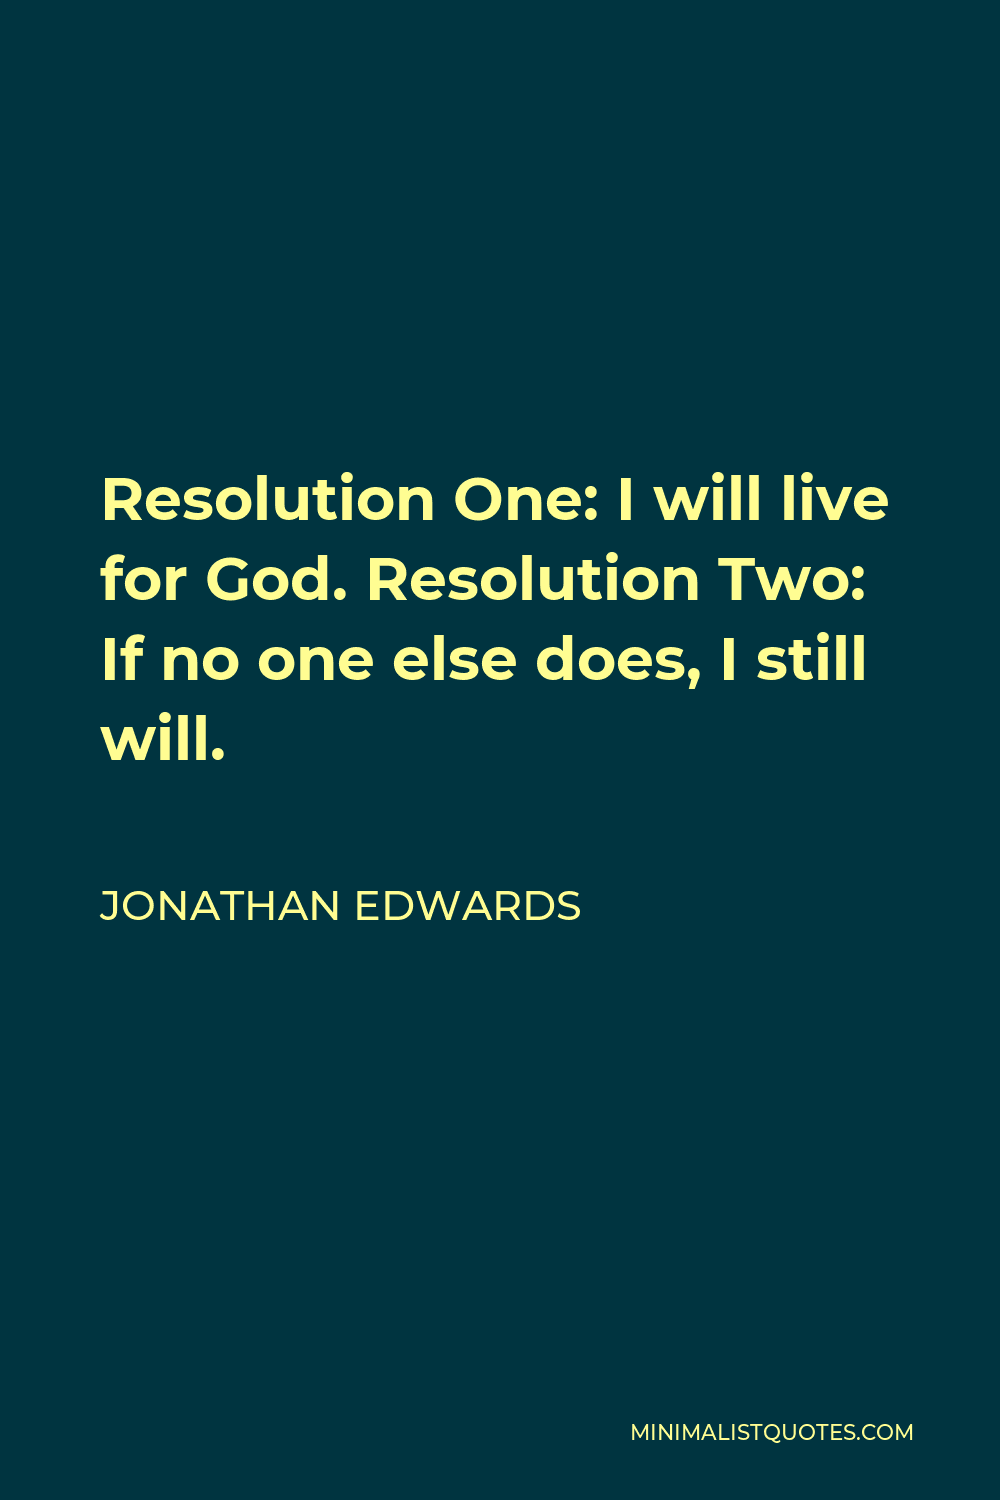 Jonathan Edwards Quote - Resolution One: I will live for God. Resolution Two: If no one else does, I still will.